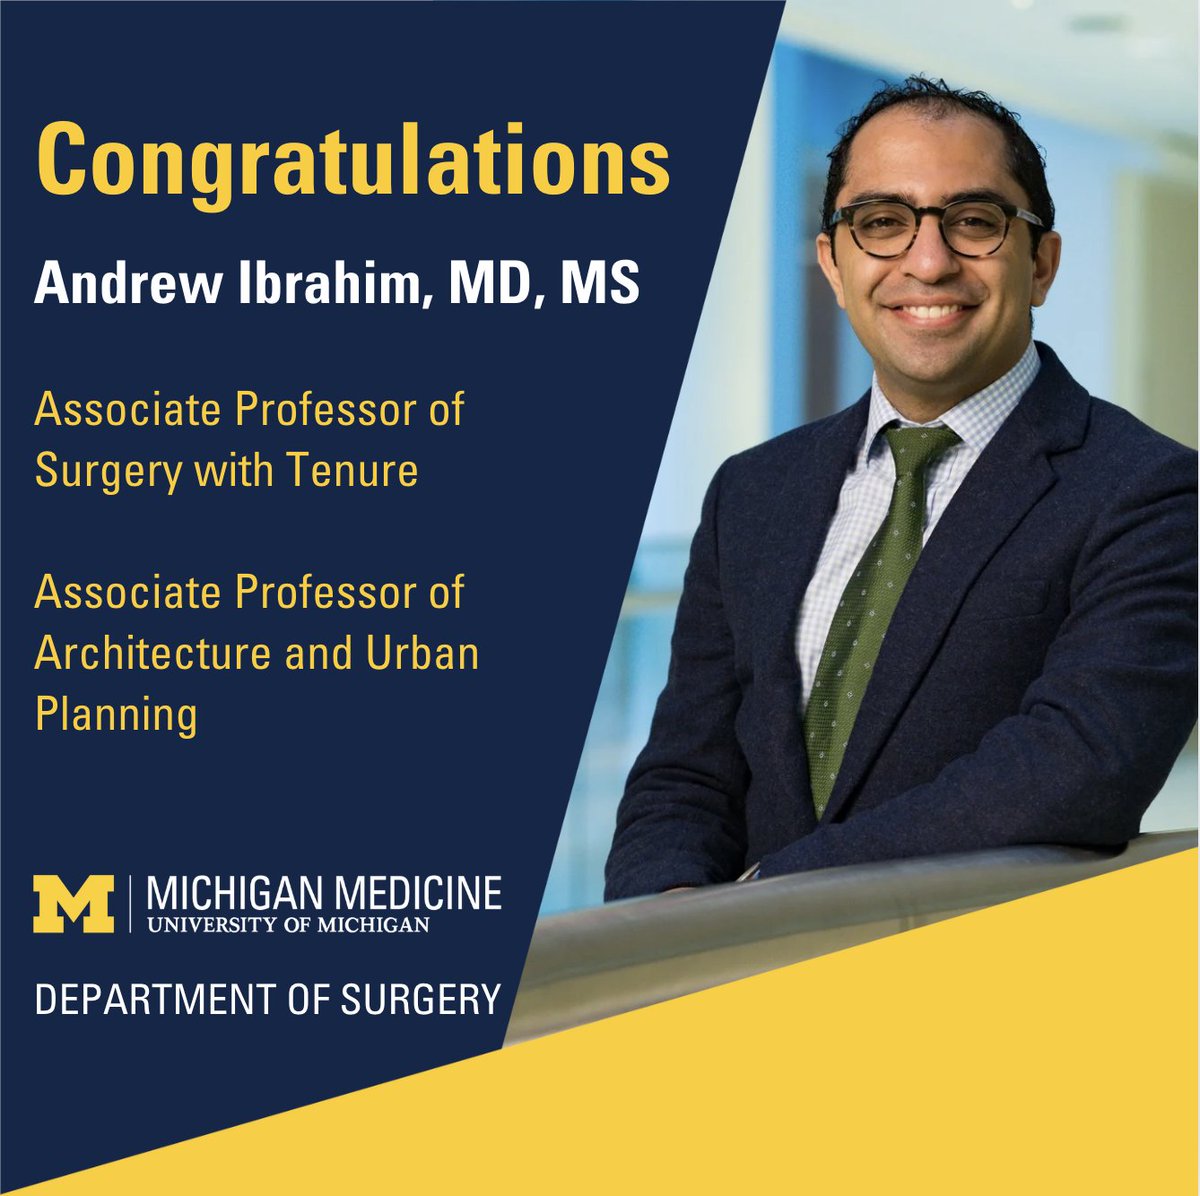 Congratulations to Andrew Ibrahim, M.D., on your promotion to Associate Professor of Surgery with Tenure and Associate Professor of Architecture and Urban Planning!